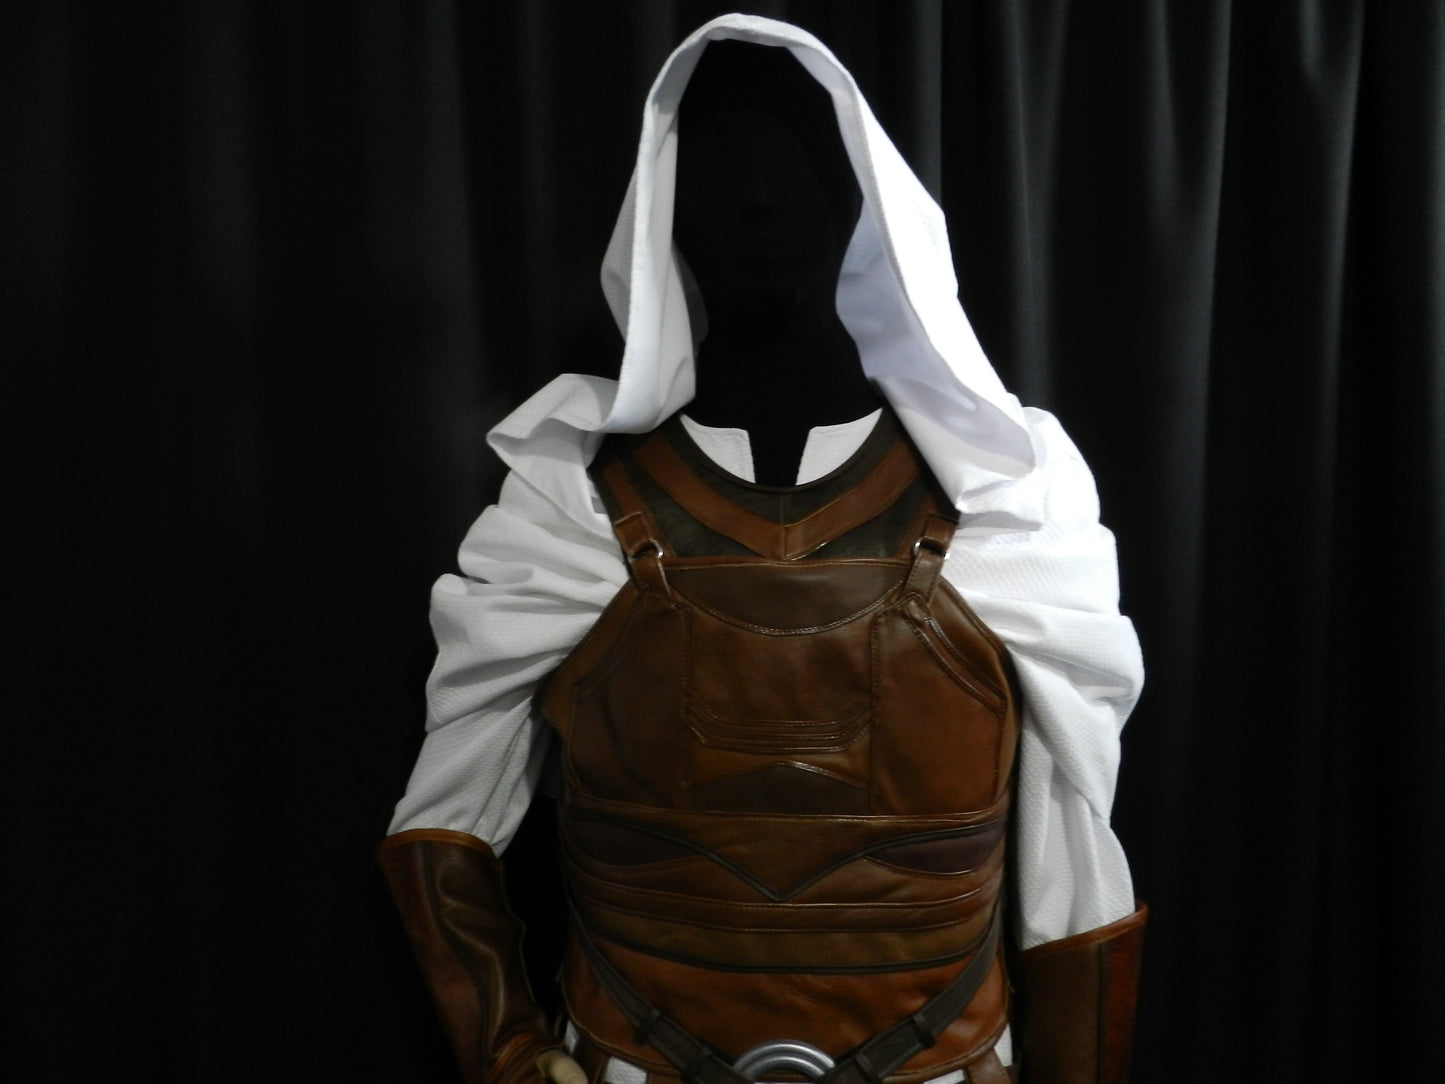 New version! Inspired by Jedi Revan Star wars cosplay costume real OR faux leather custom made to your size!